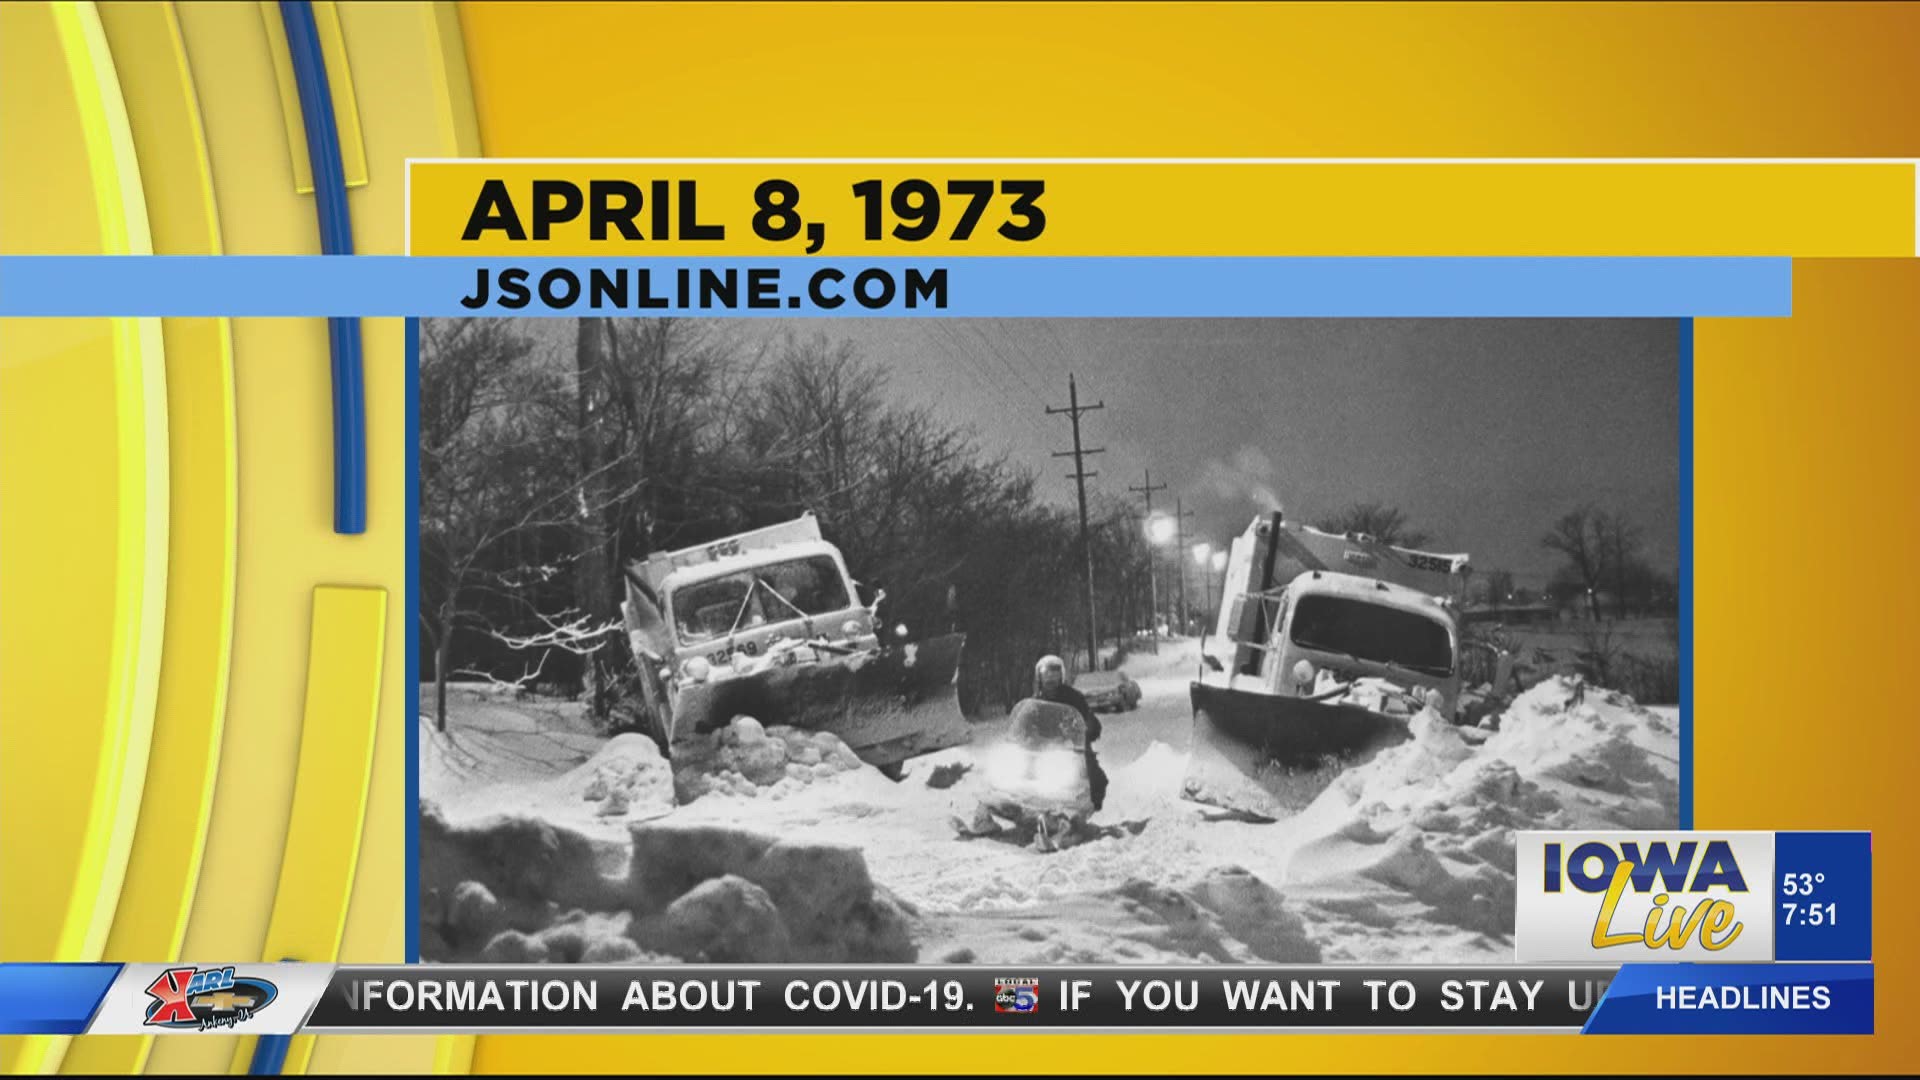 Mother Nature again showed Iowans that she doesn't care what the calendar says, when the record-setting April spring blizzard began on this date in 1973.